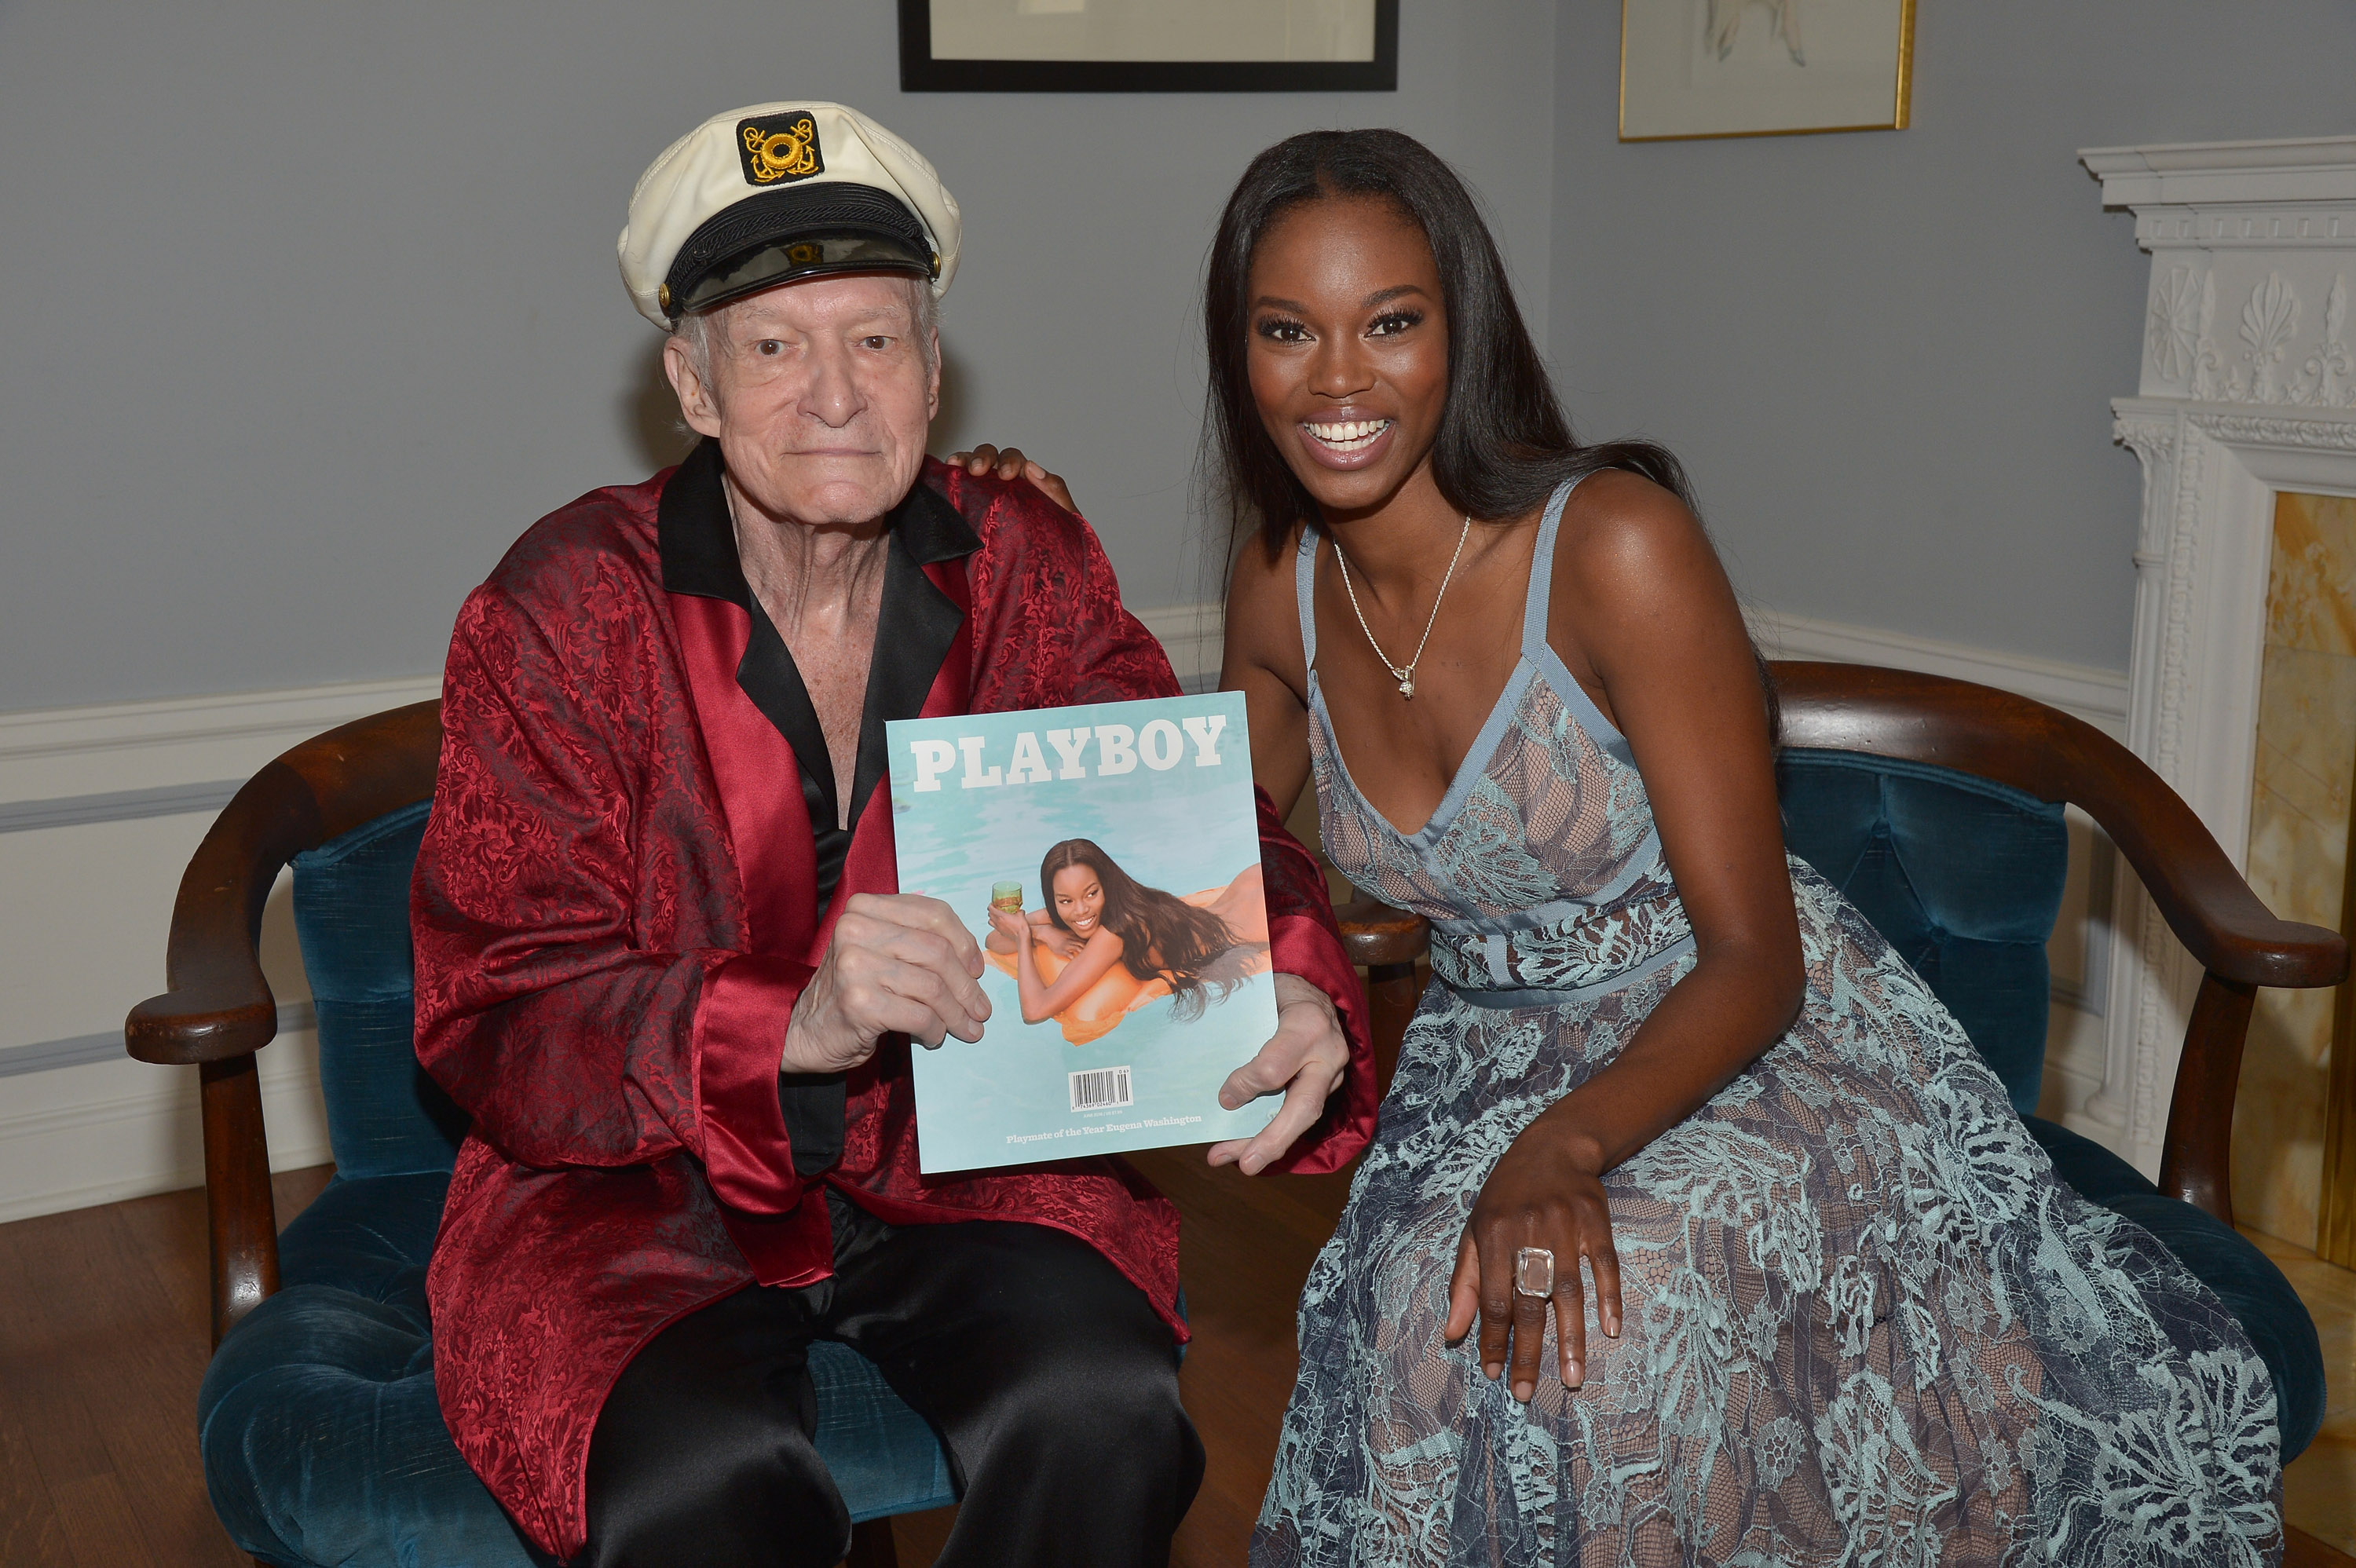 Playboy's 2016 Playmate Of The Year Announcement At The Playboy Mansion